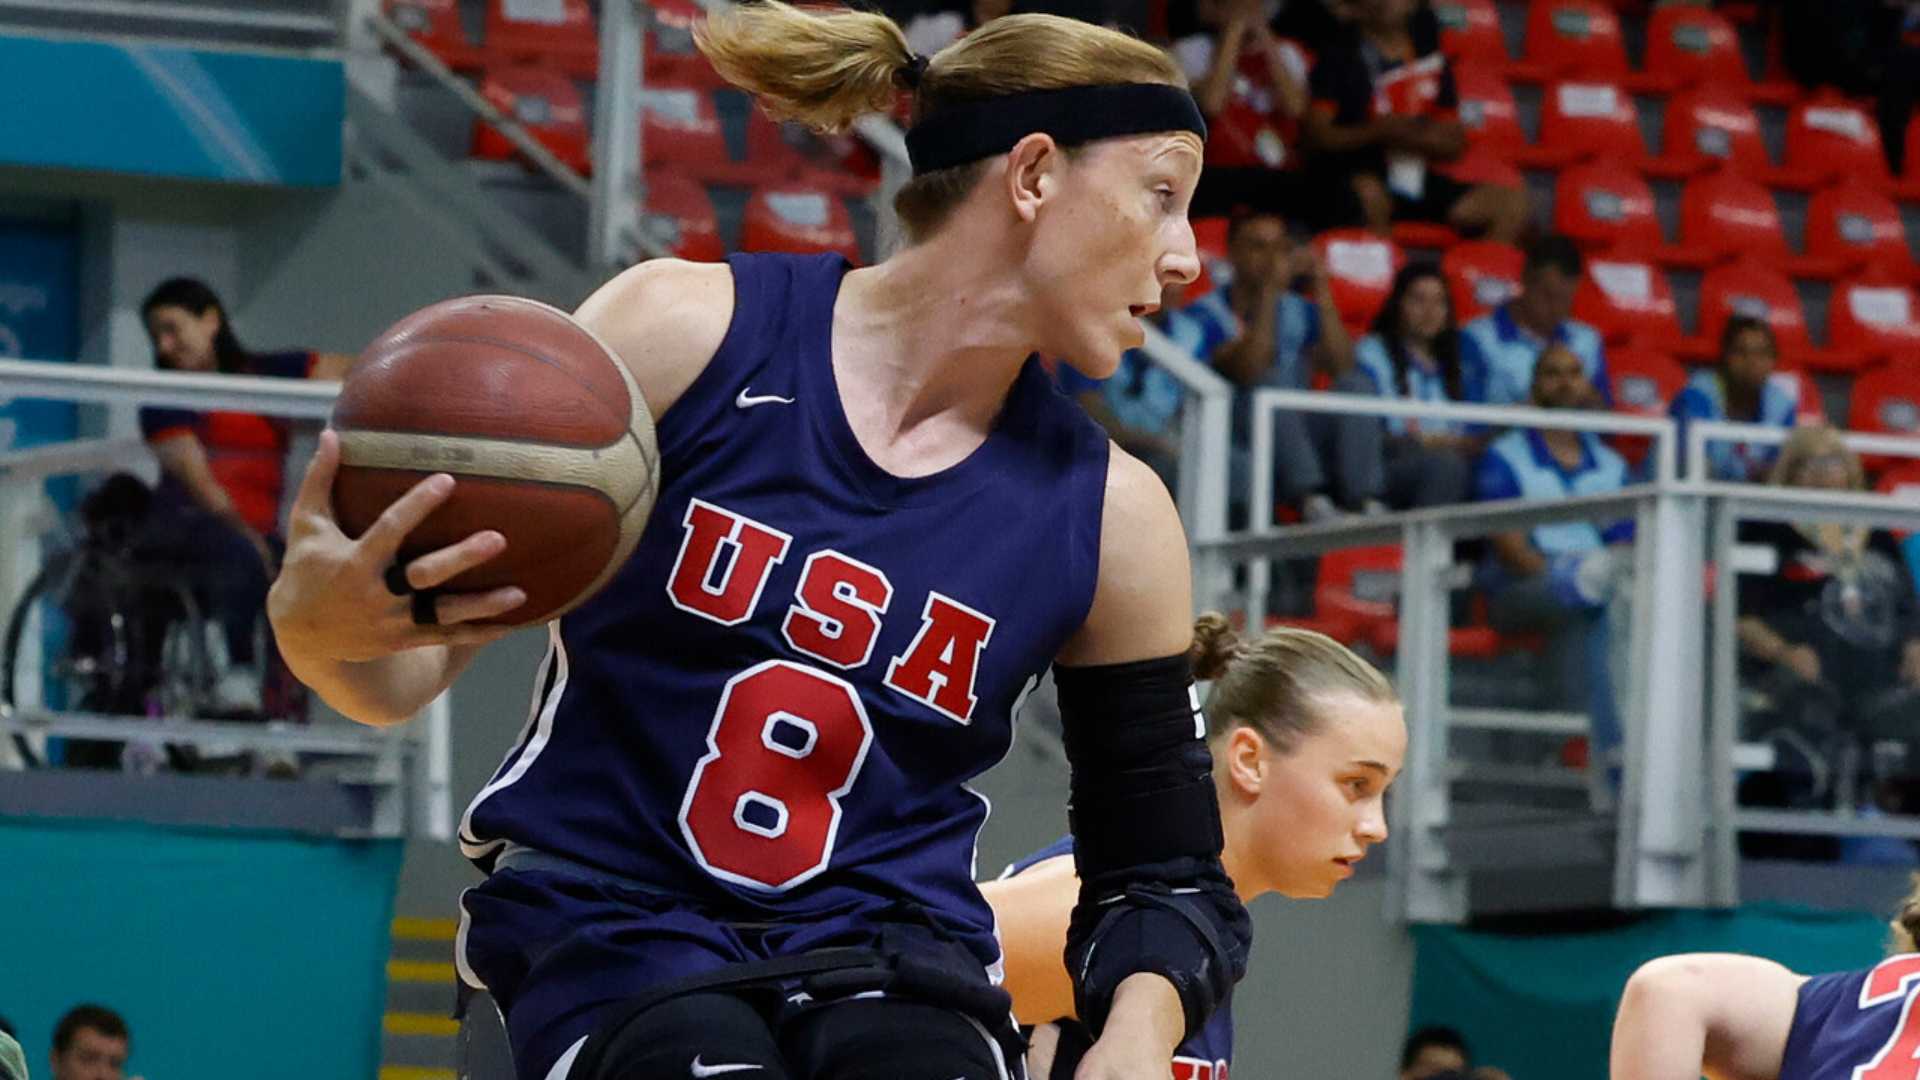 The U.S. Wins Gold and Qualifies for Paris 2024 in Female's Basketball